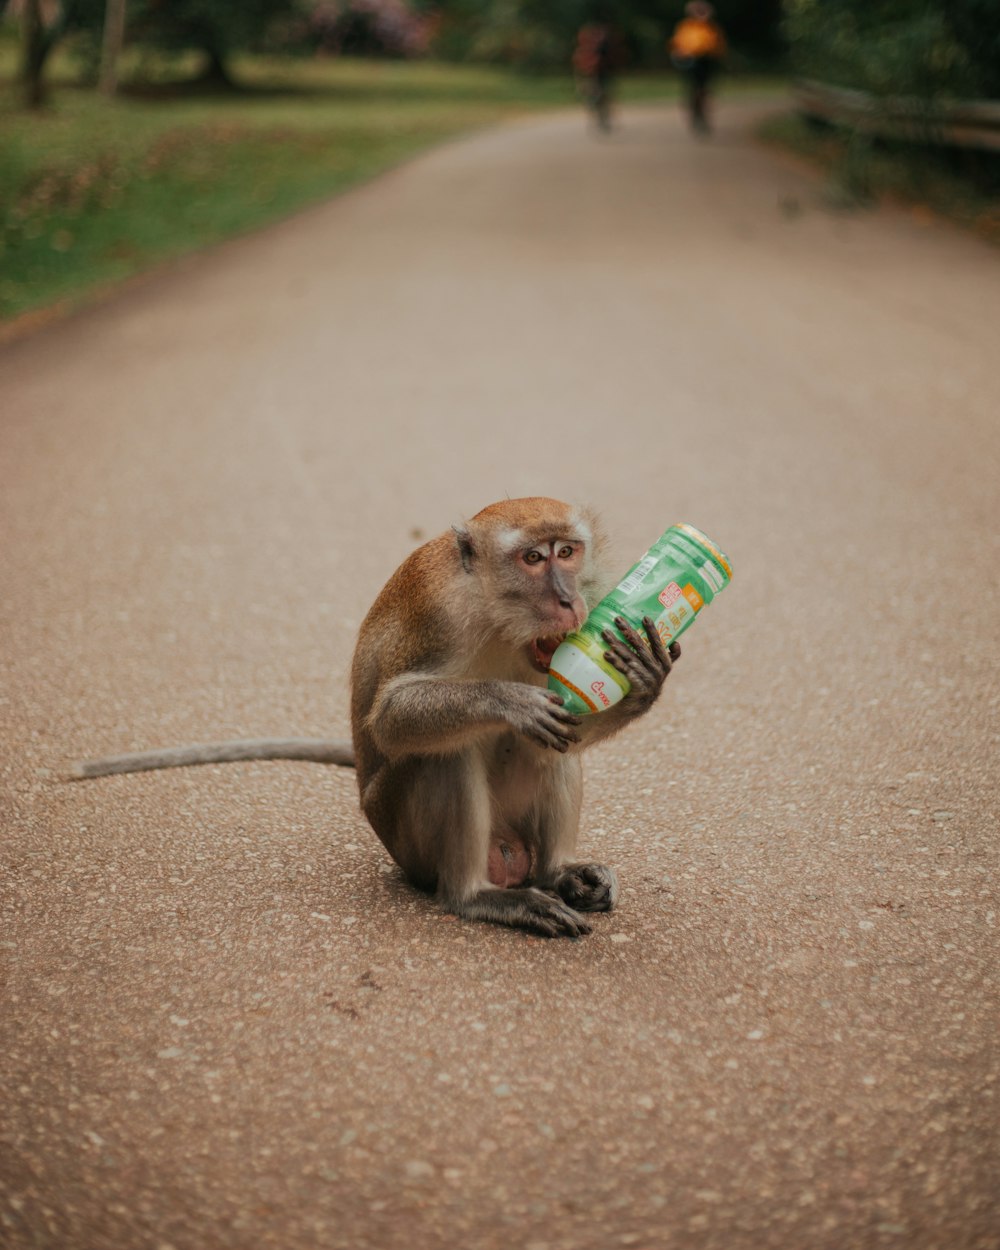 a monkey sitting on the side of a road holding a can of soda